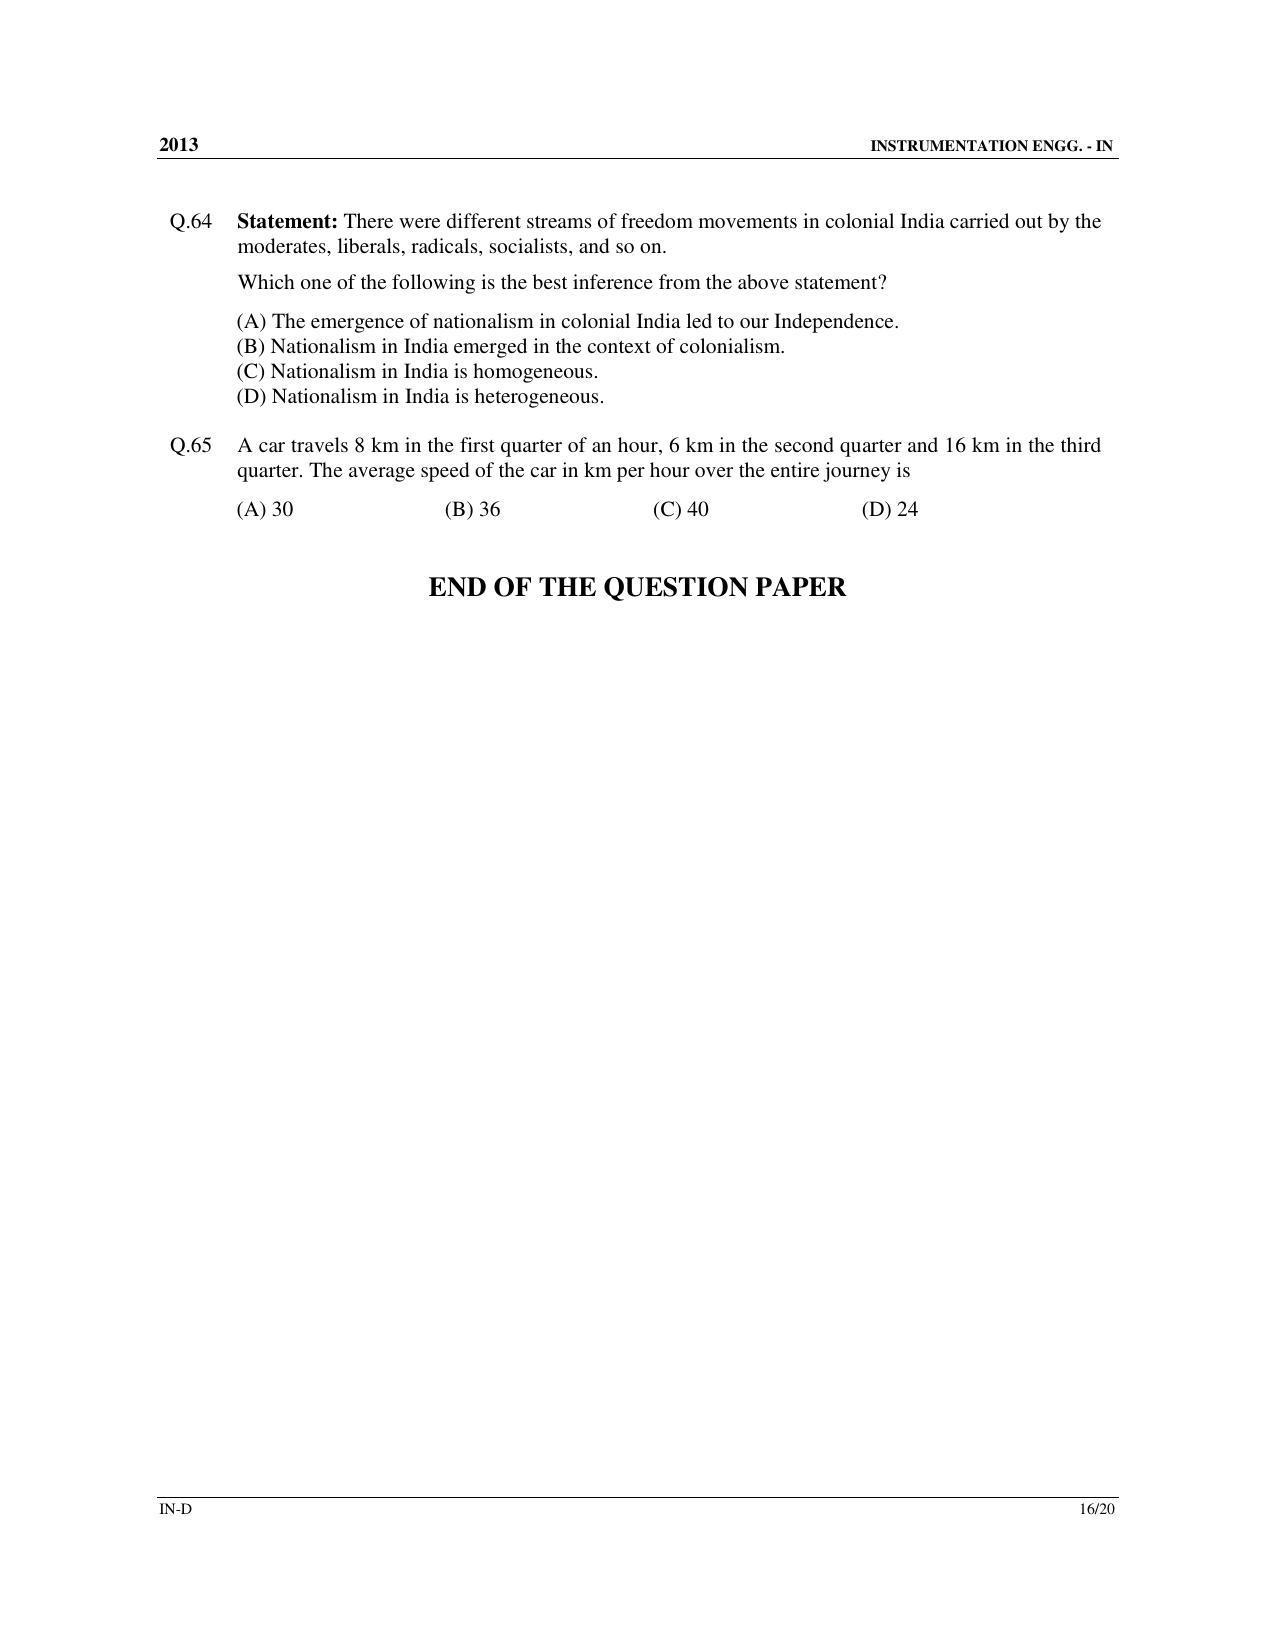 GATE 2013 Instrumentation Engineering (IN) Question Paper with Answer Key - Page 68